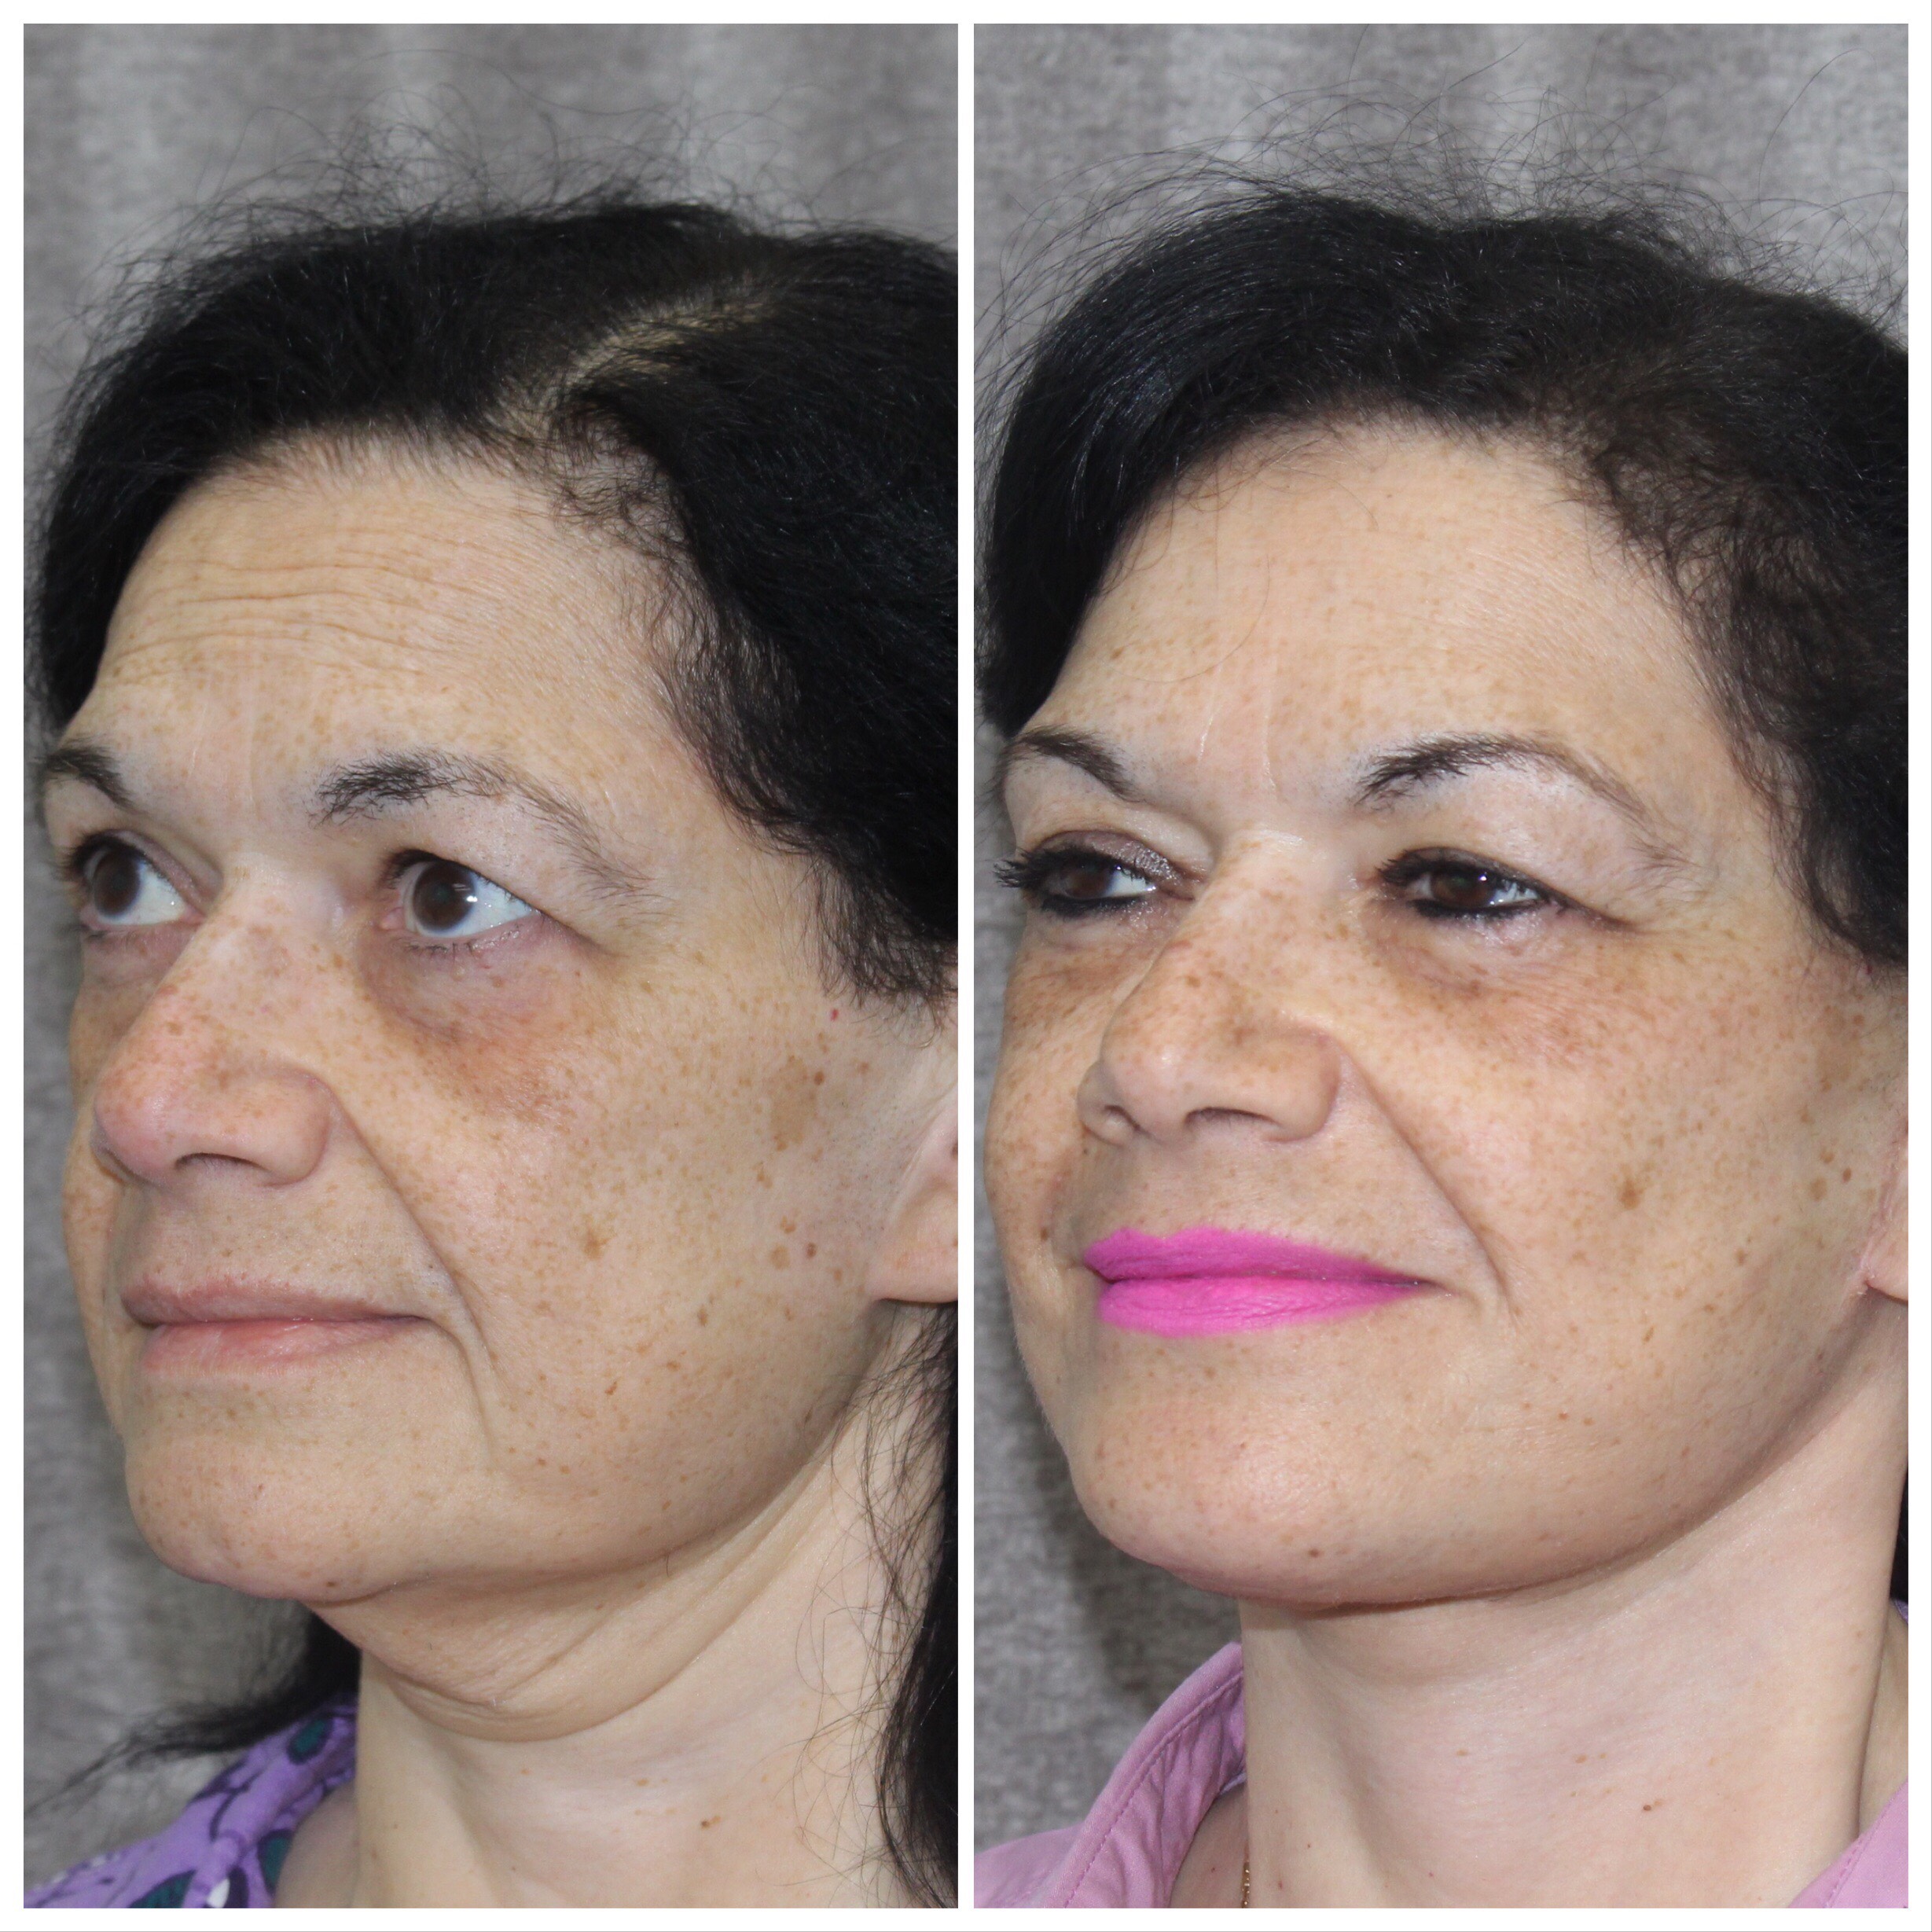 Before and After Facelift in Brooklyn patient from Dr. Doshi 02